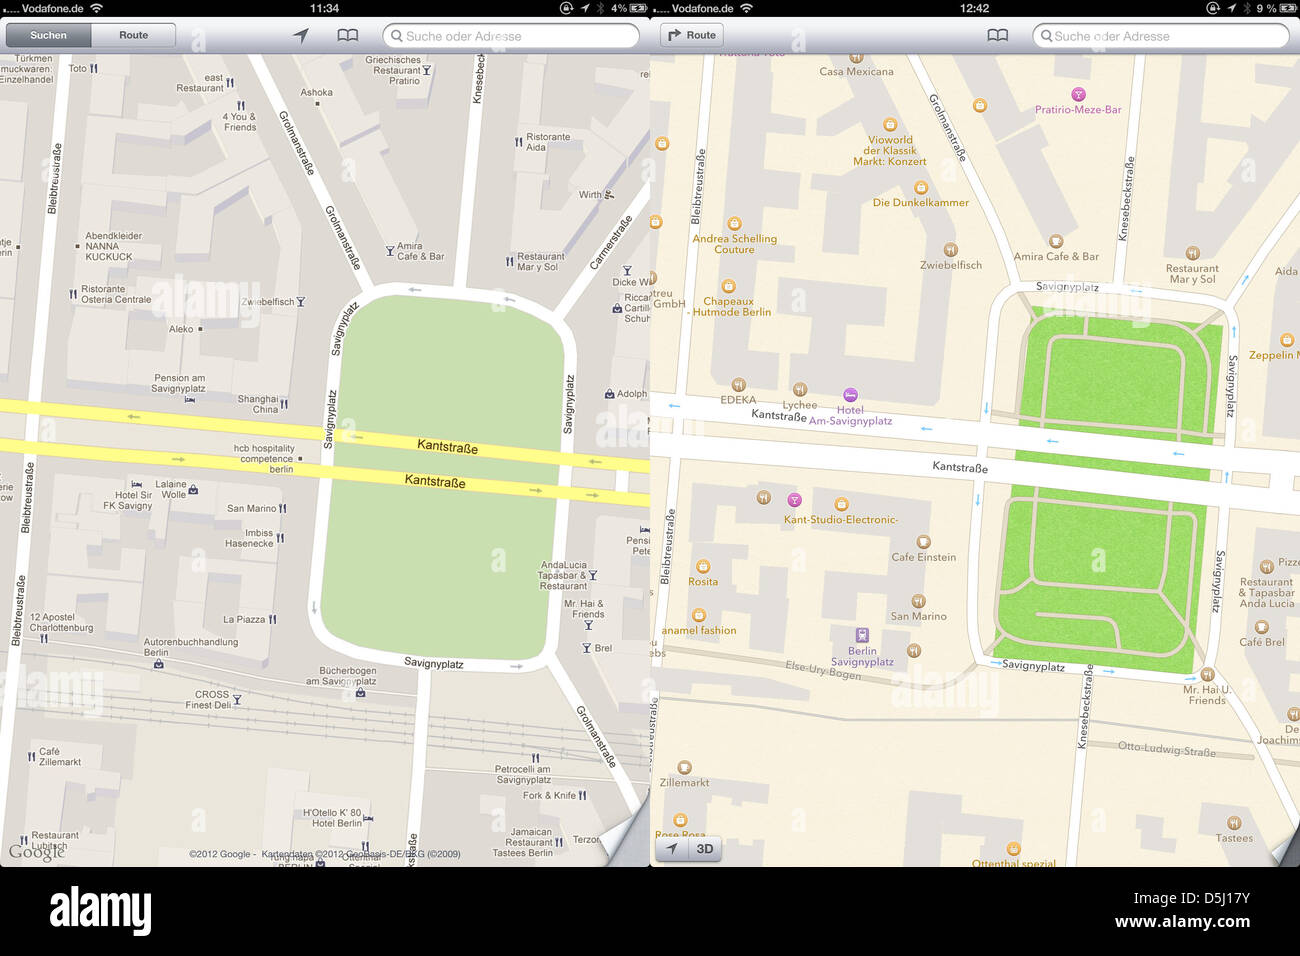 (COMBO) A composite photo shows two screenshots of maps of the area around Savignyplatz in Berlin on an iPhone in Berlin, Germany, 21 September 2012. On the left is the Google Maps version, on the right is the new Apple map service. With the introduction of the new iPhone 5, Apple has replaced Google Maps with their own service. Mistakes and missing details are annoying many users. Stock Photo